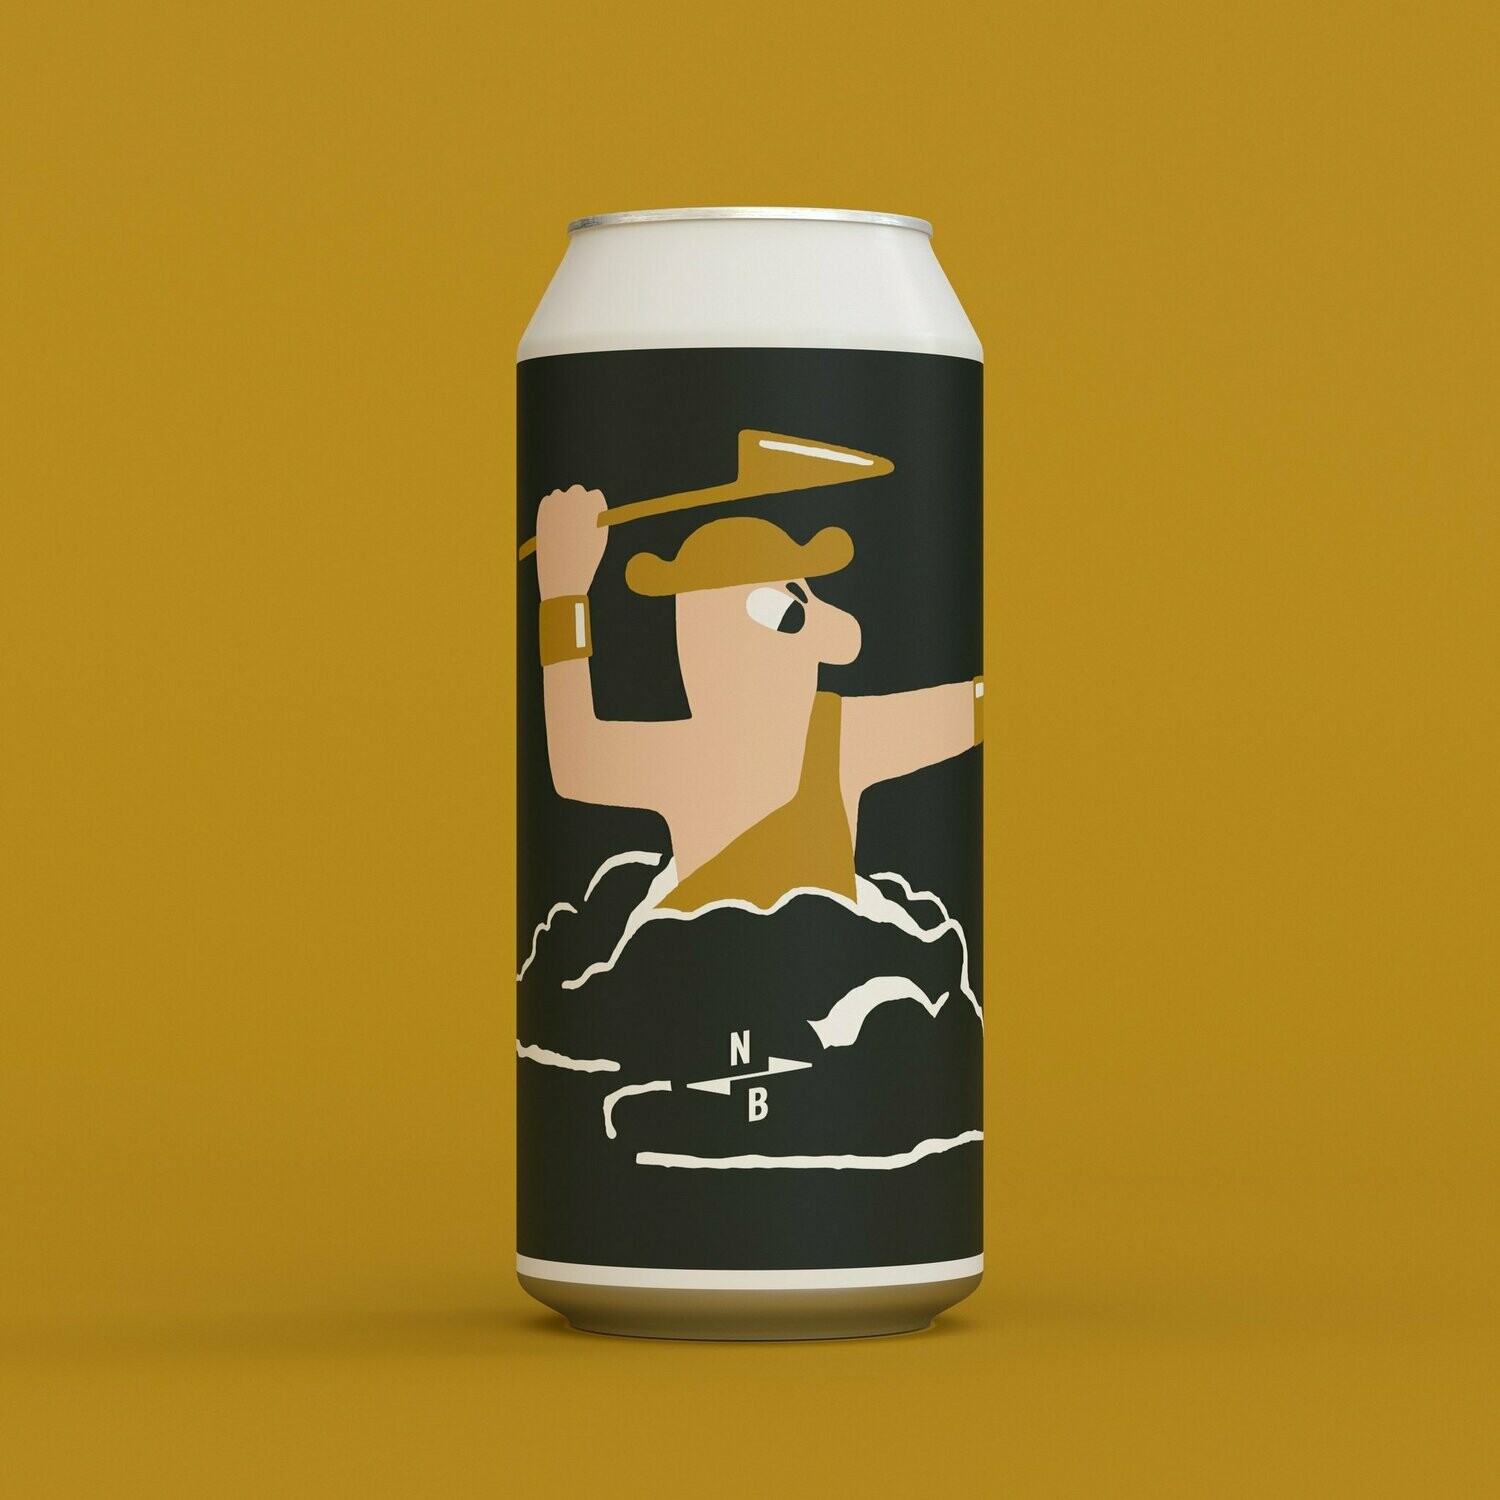 North Brew X Mikkeller Imperial Stout